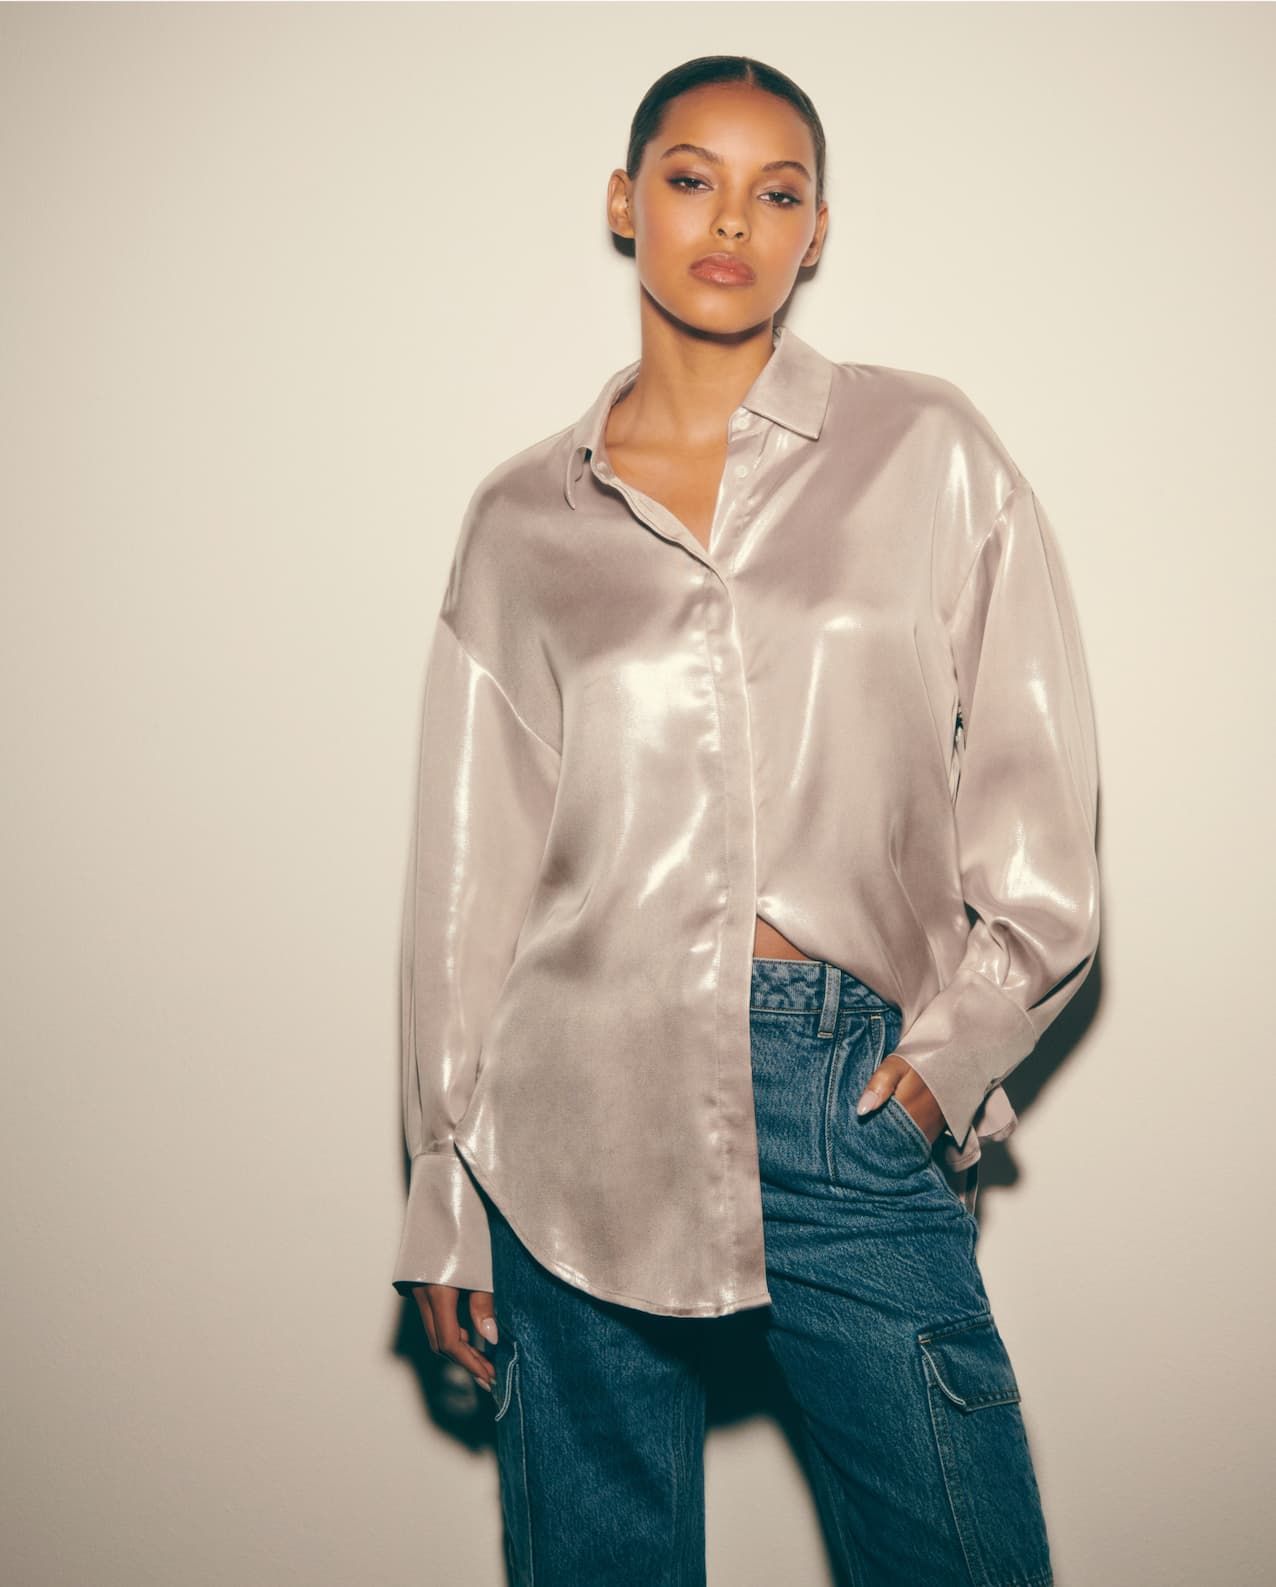 A model wears a metallic silver button down shirt with blue jeans.